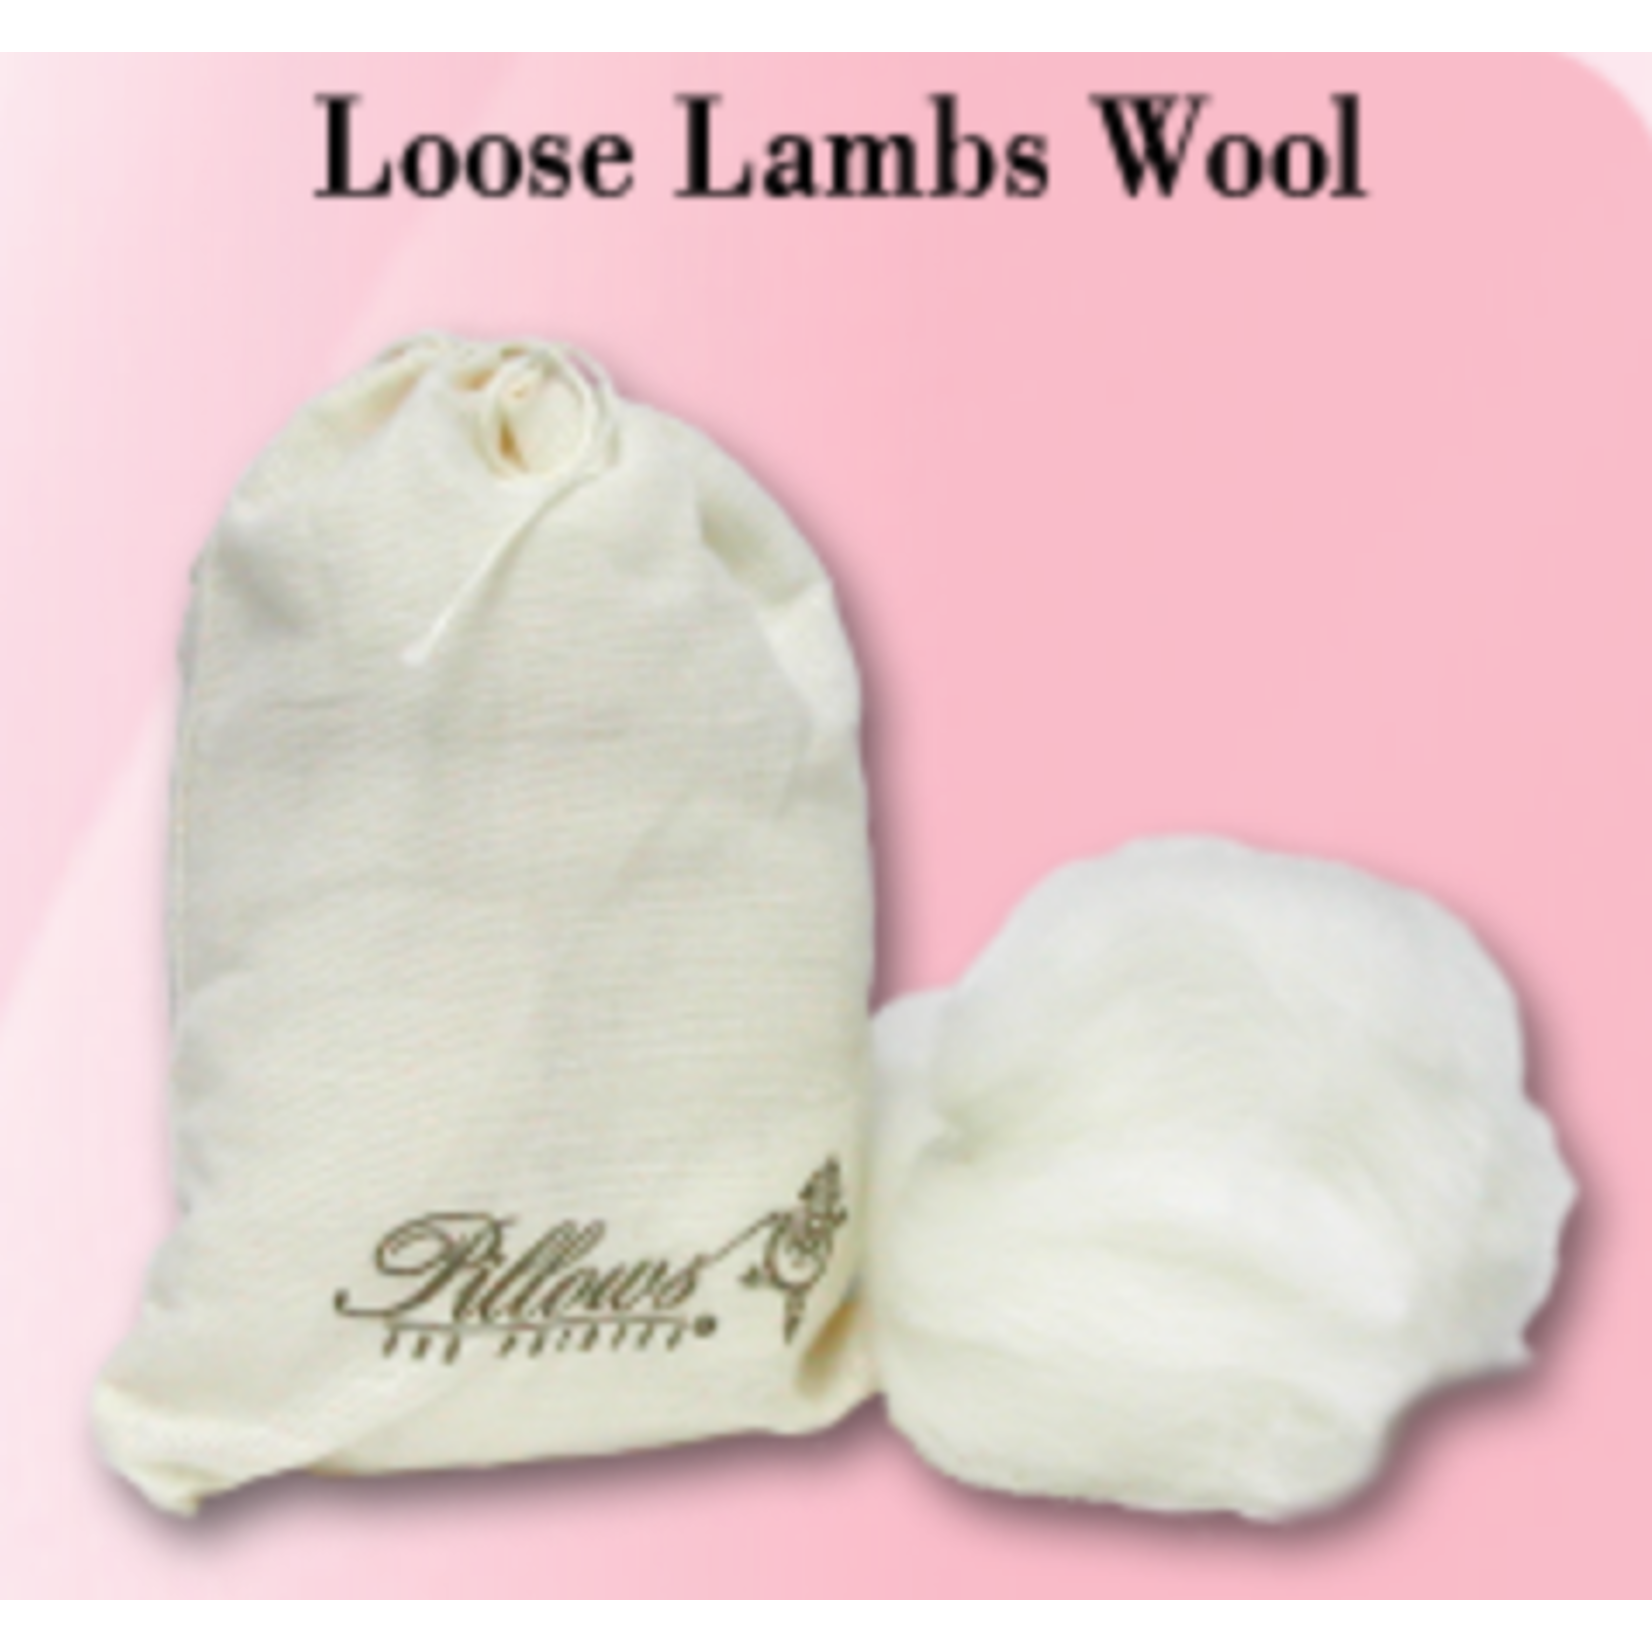 Pillows For Pointes Loose Lambs Wool